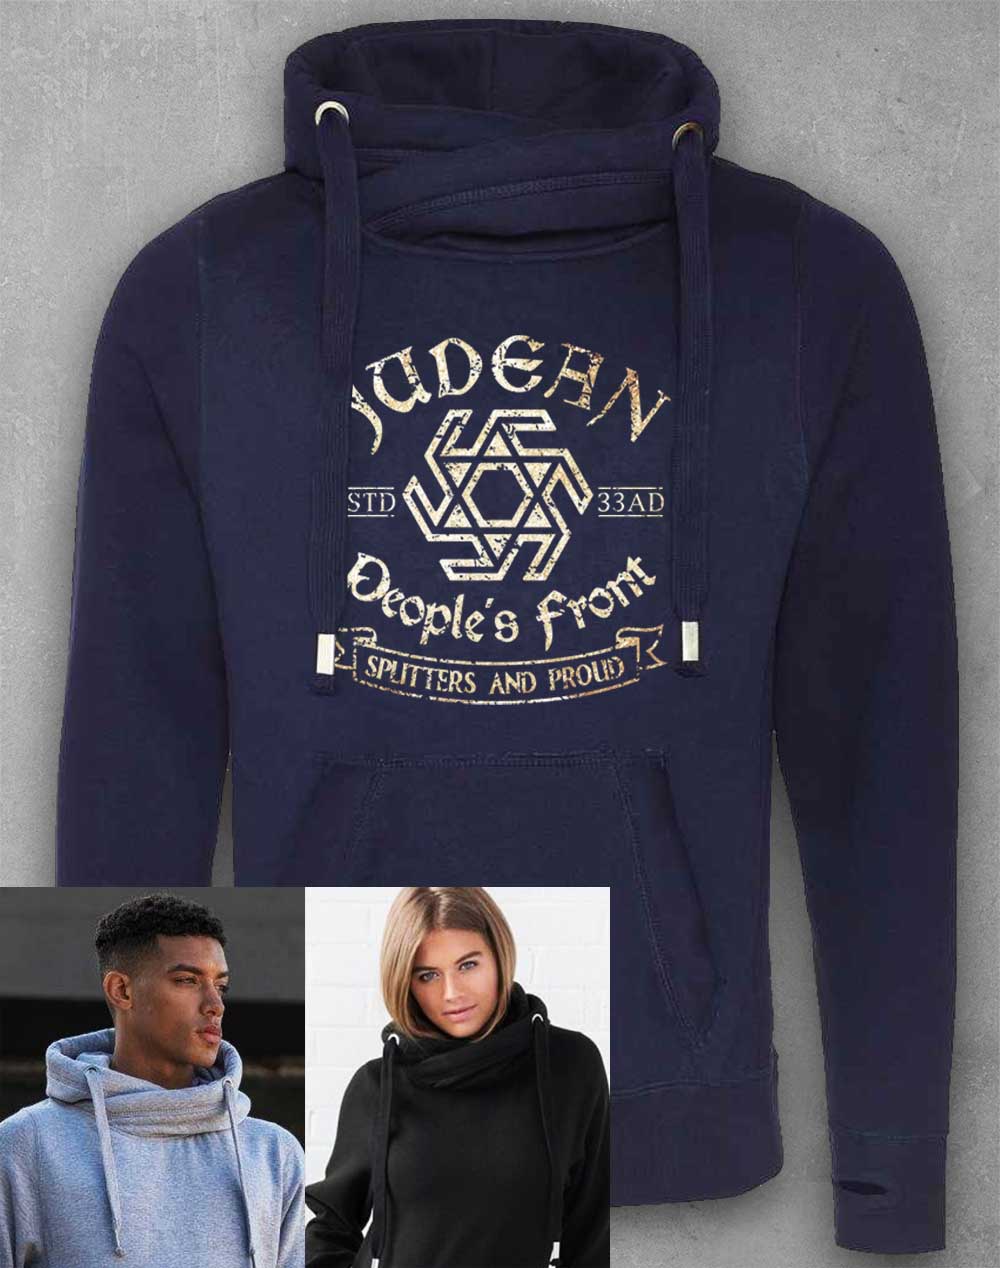 Oxford Navy - Judean People's Front Chunky Cross Neck Hoodie